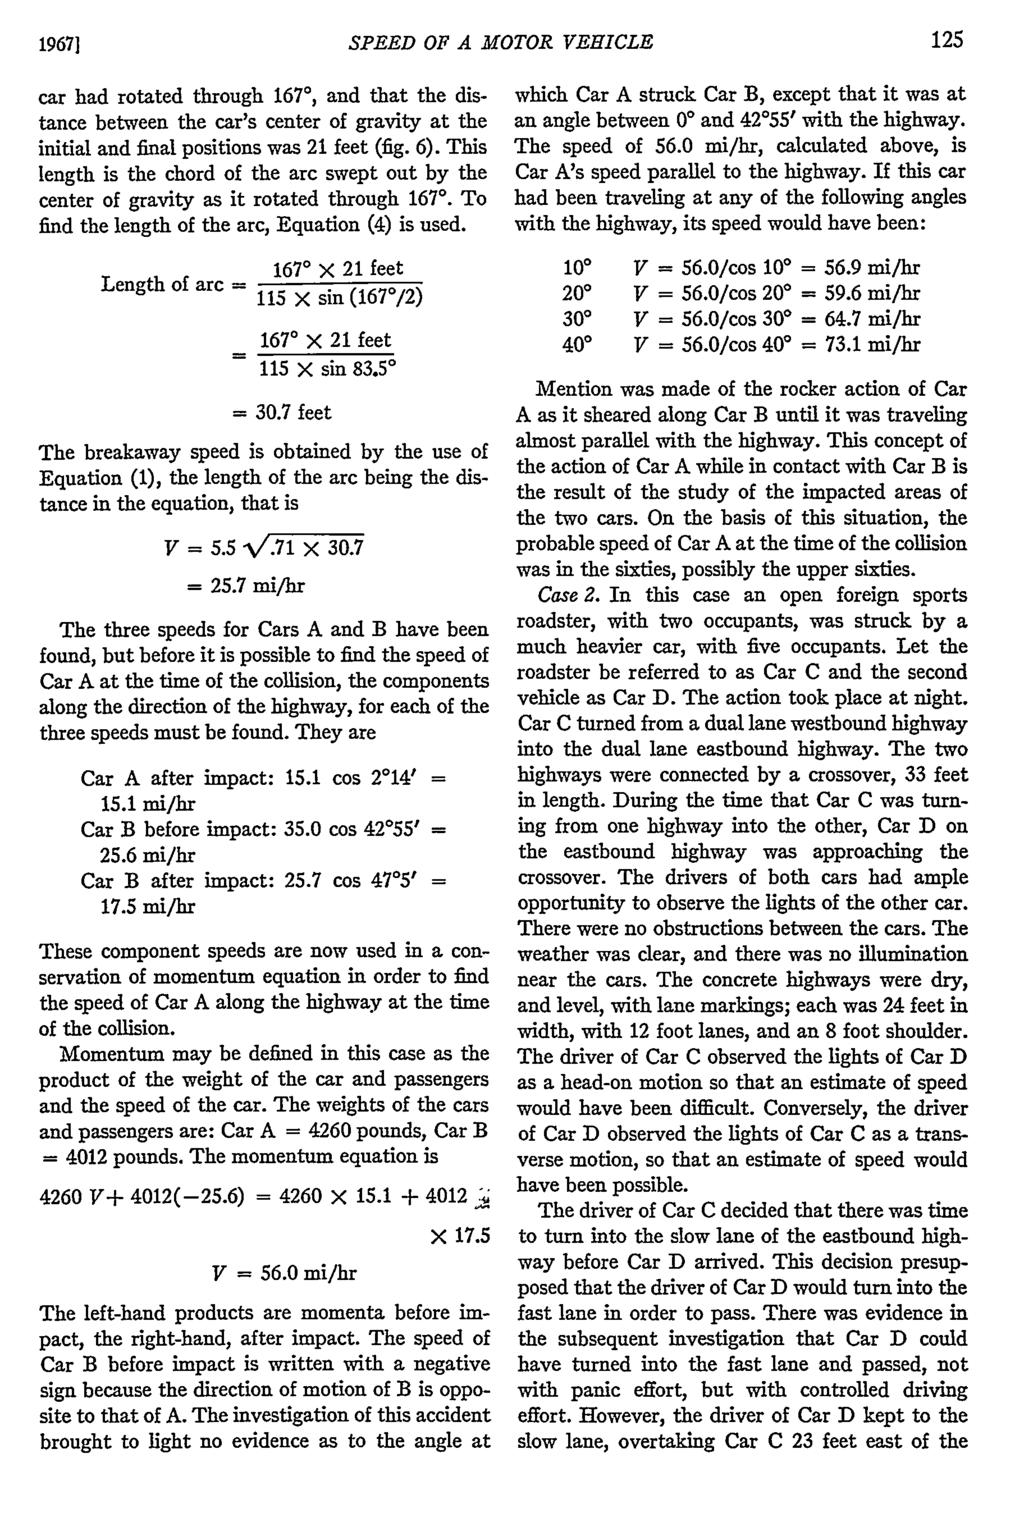 19671 SPEED OF A MOTOR VEHICLE car had rotated through 1670, and that the distance between the car's center of gravity at the initial and final positions was 21 feet (fig. 6).